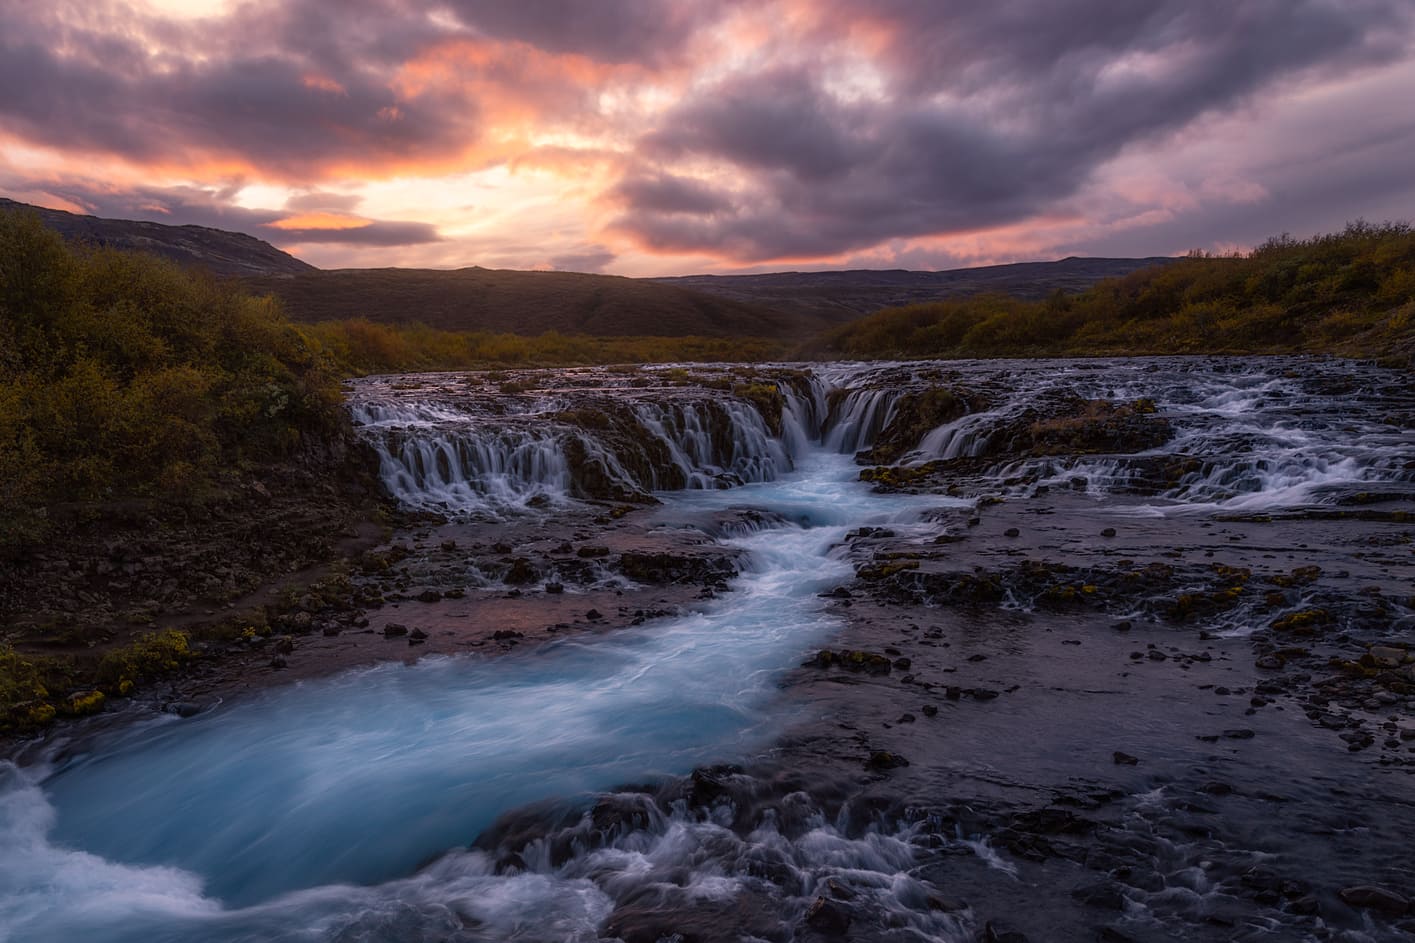 Bruarfoss, one of the best stops in the Golden Circle Iceland